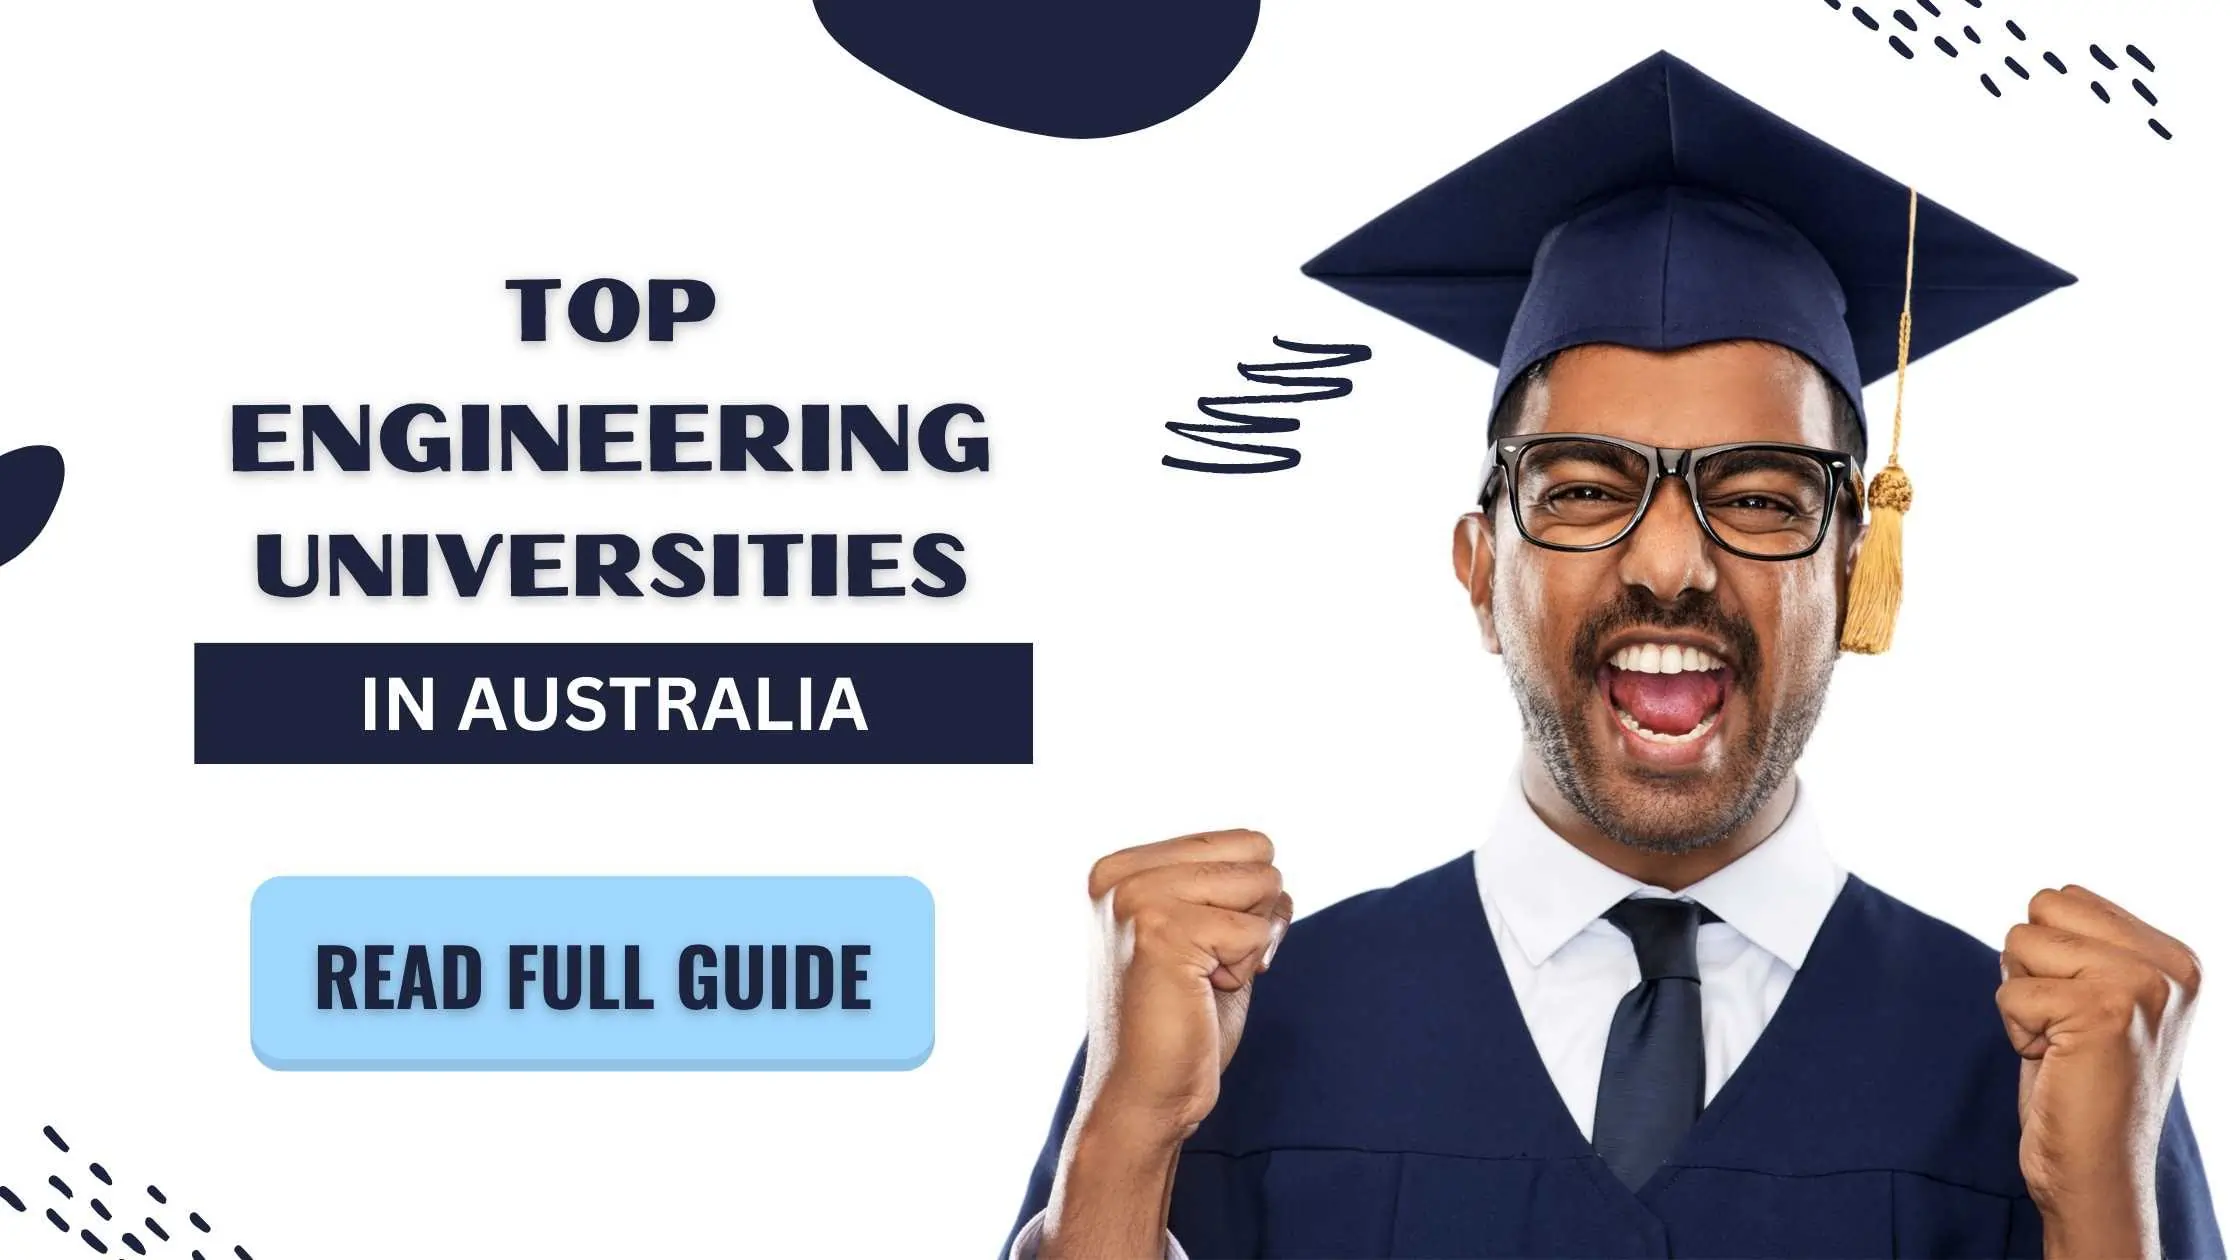 A graduate completed his engineering course at a top-ranked Australian university.